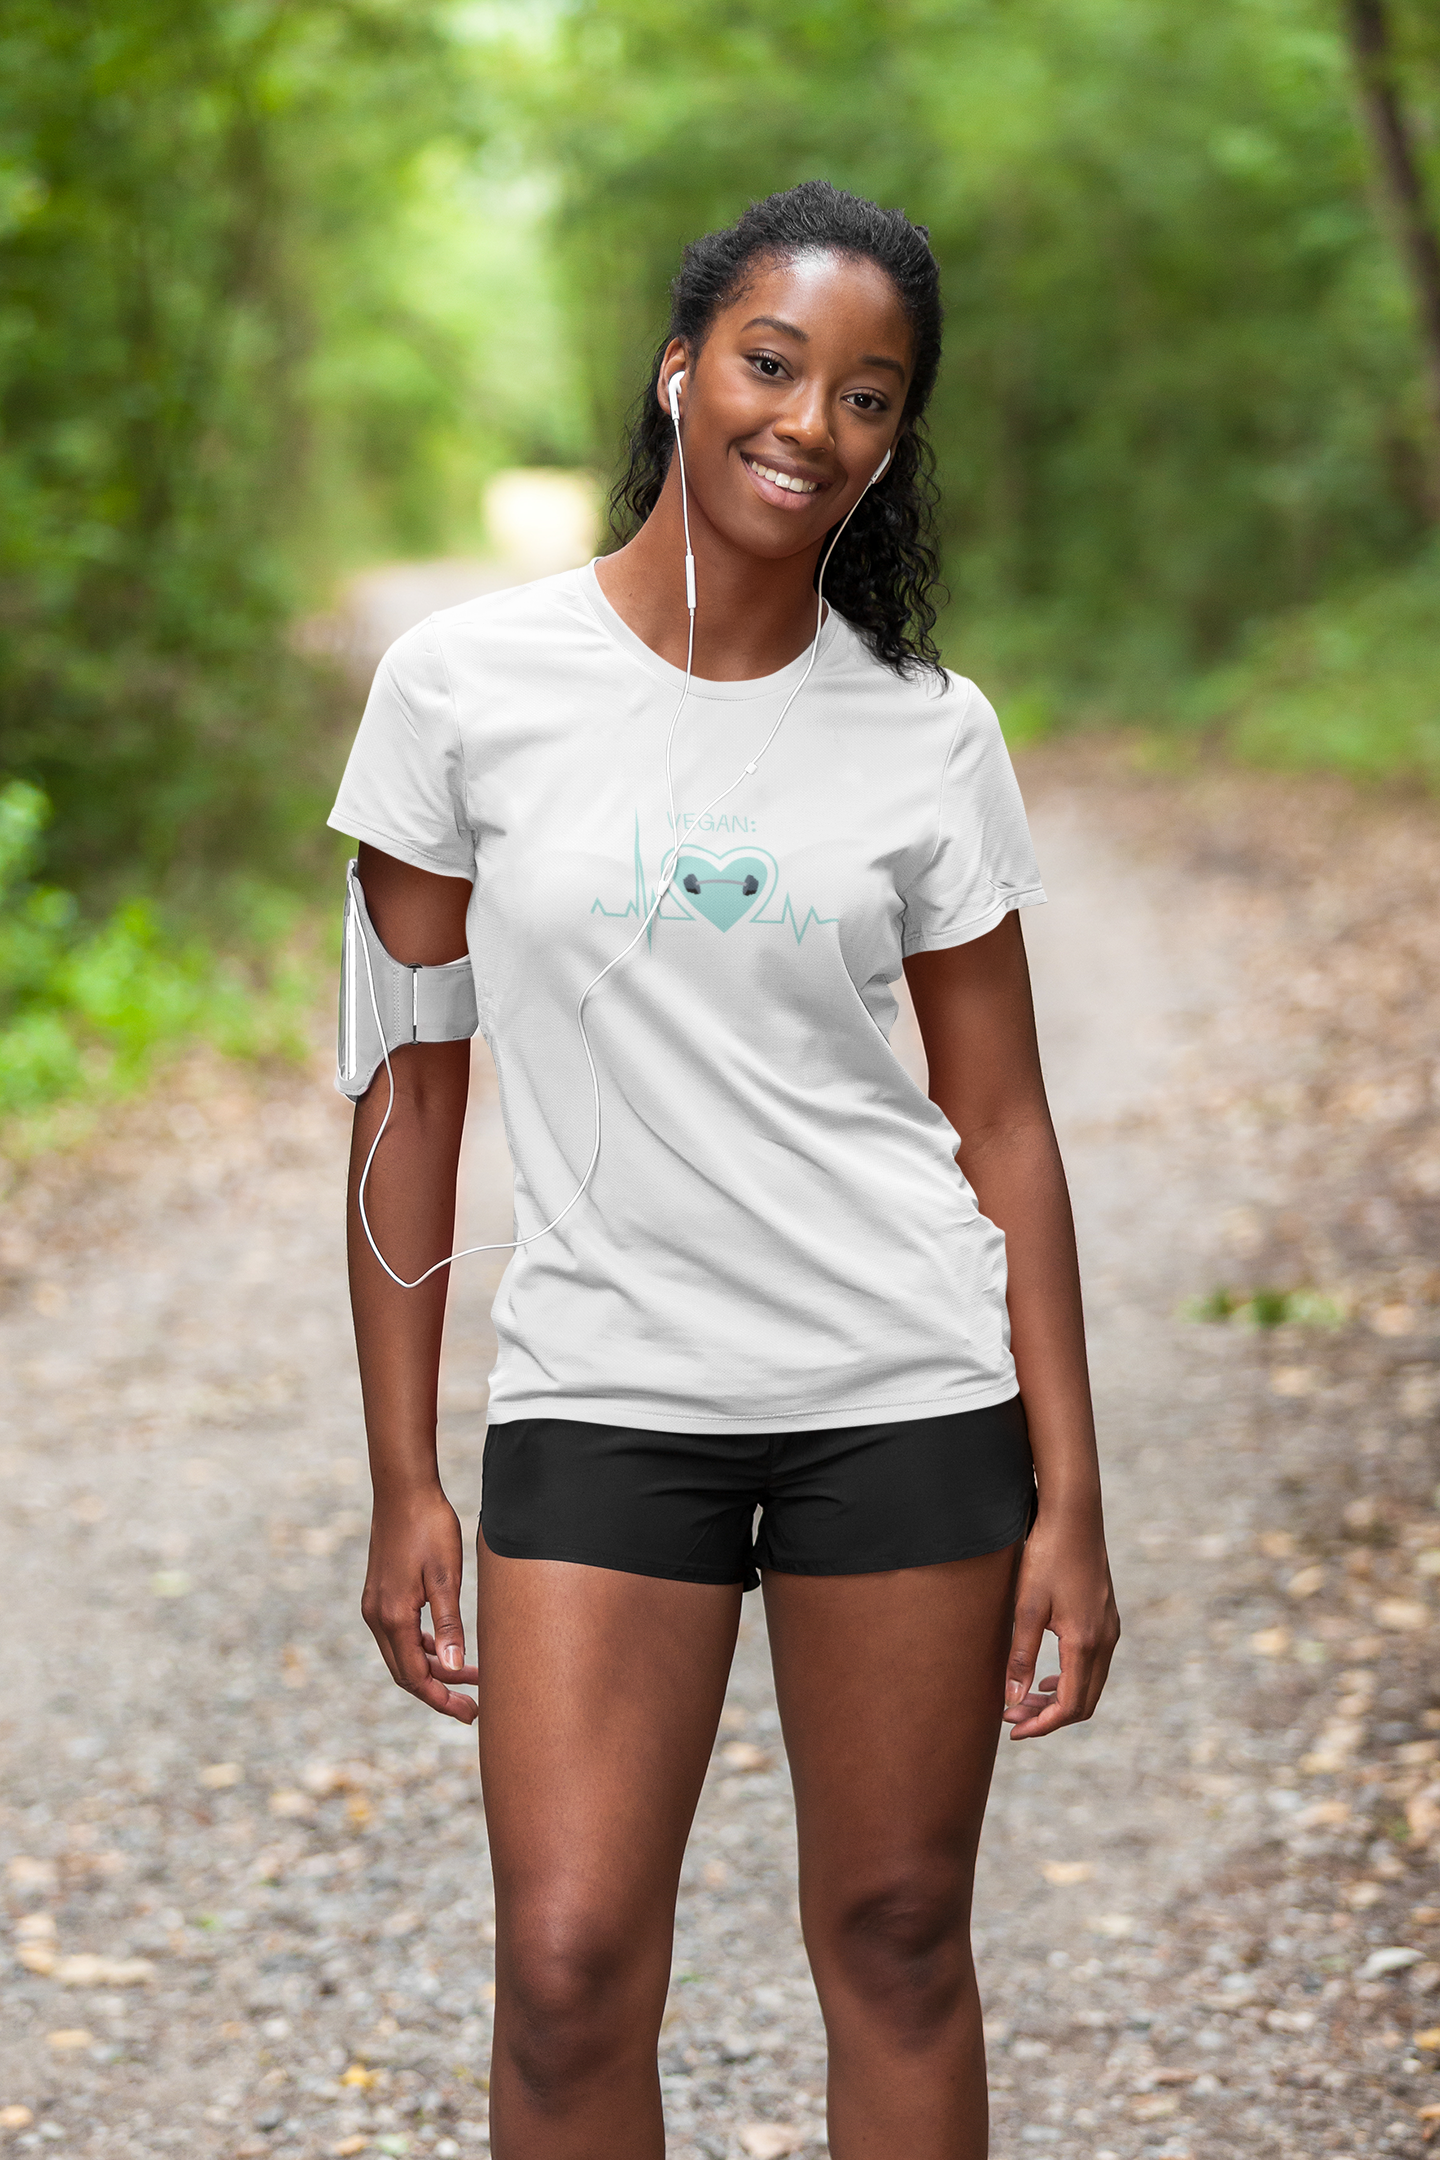 vegan heartbeat t-shirt with a dumbbell, on white premium cotton worn by a runner on a path